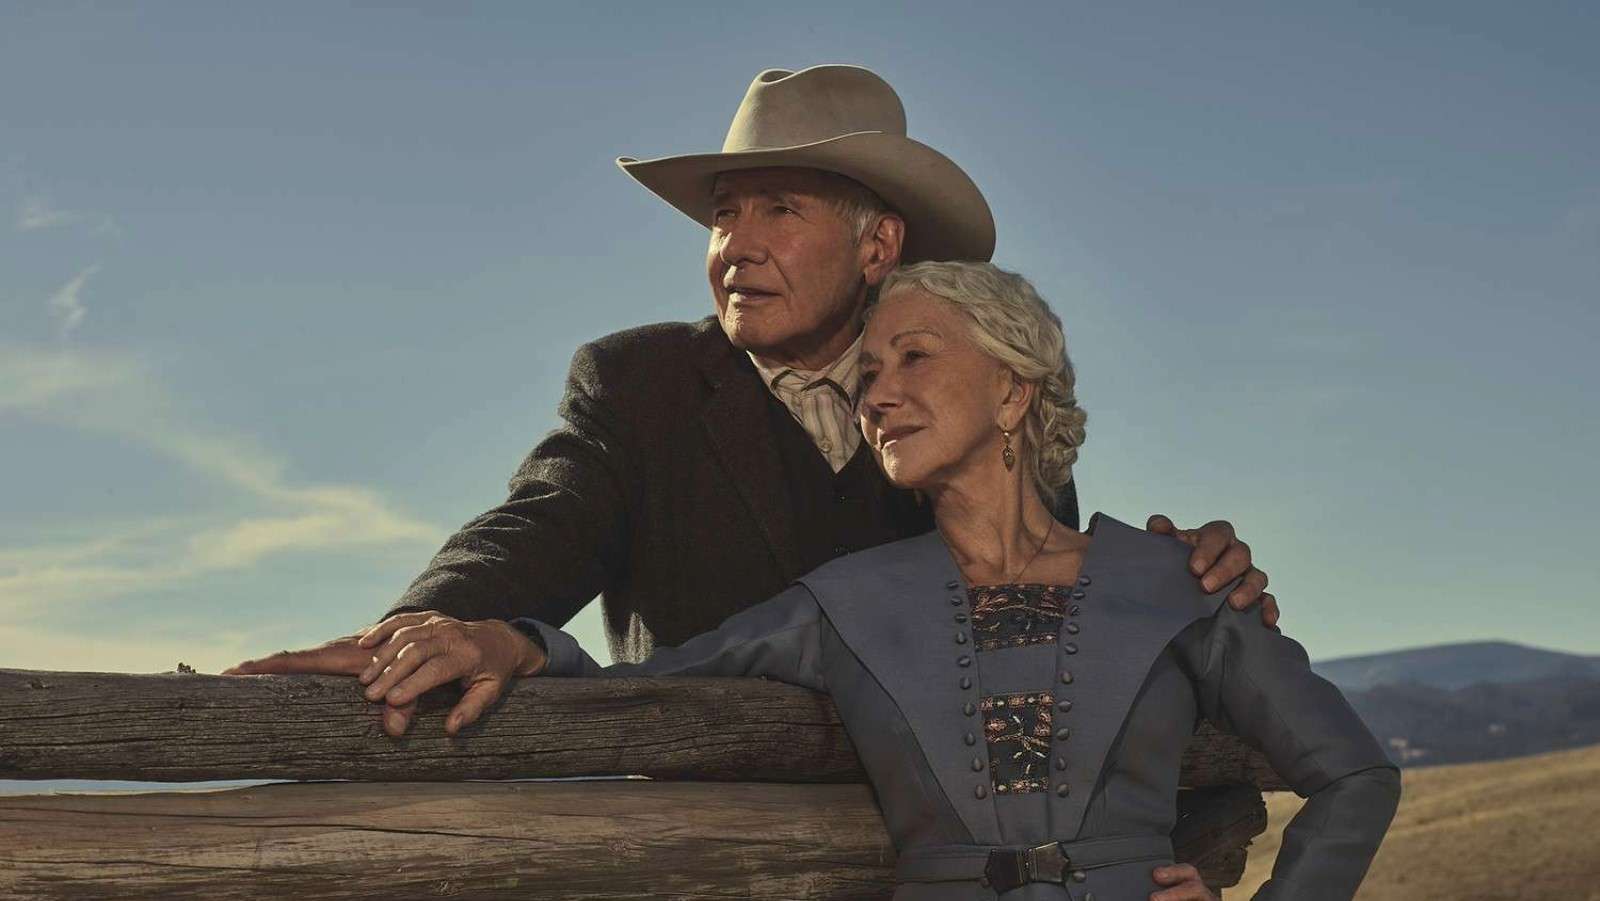 1923 cast: Harrison Ford and Helen Mirren as Jacob and Cara Dutton